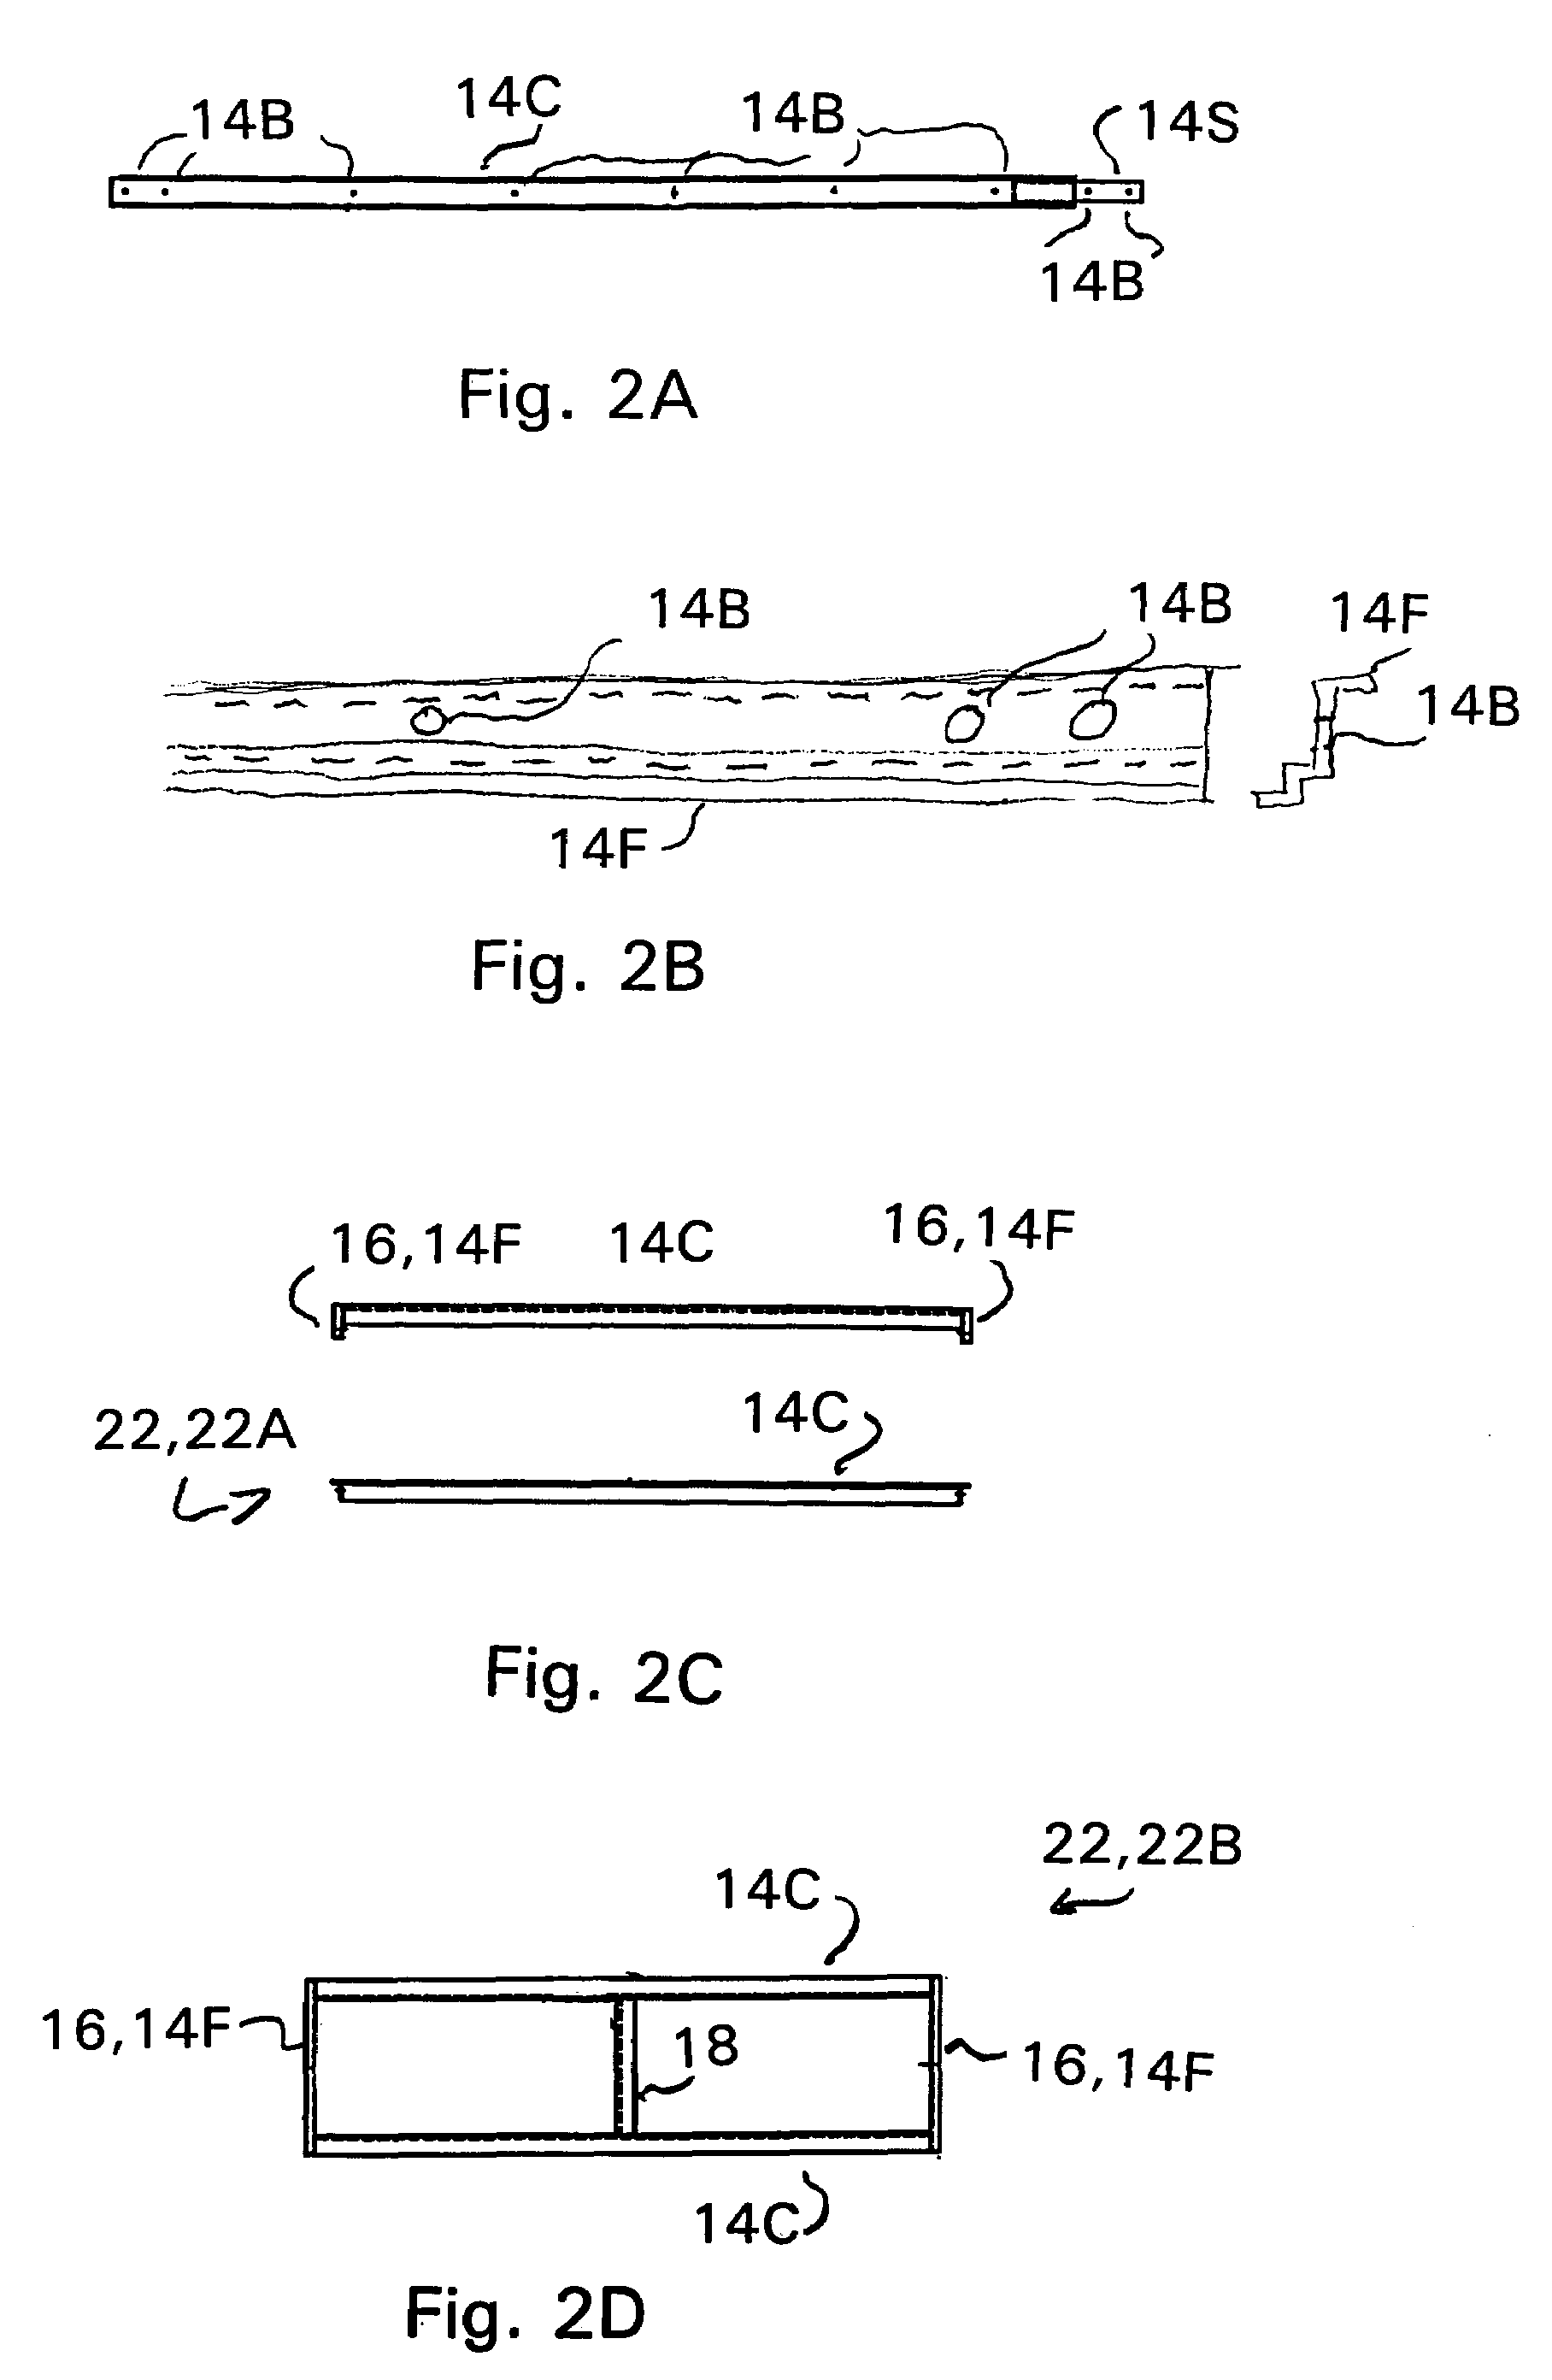 Rapidly deployable temporary modular structures and component elements thereof